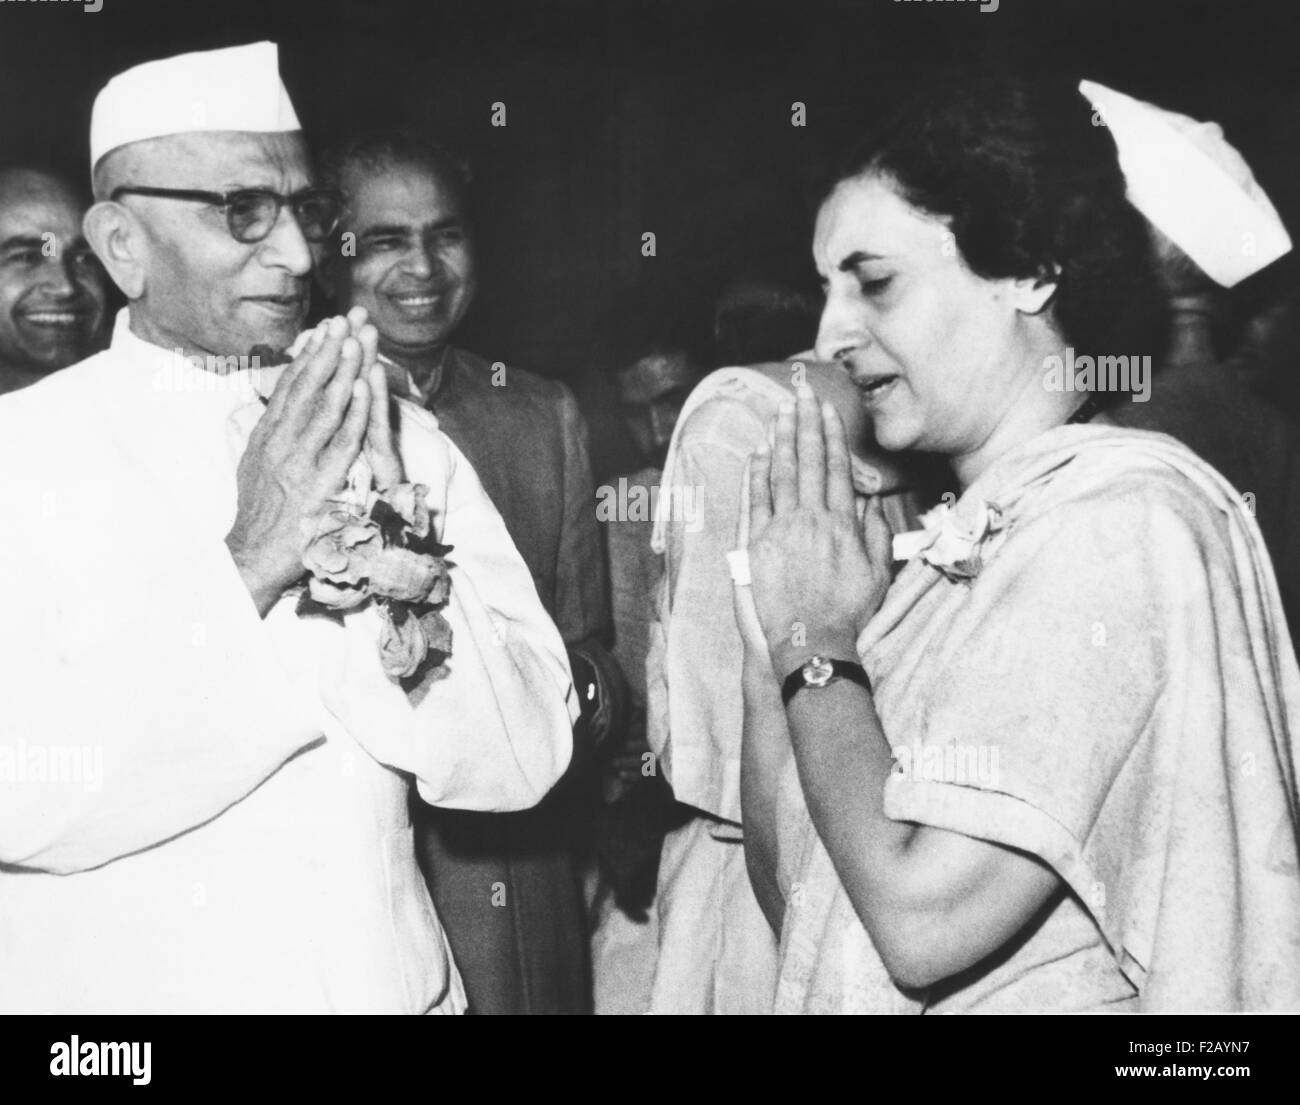 Re-elected Prime Minister Indira Gandhi with her Deputy Prime Minister, Morarji Desai. March 20, 1967. Desai resigned from the Gandhi cabinet in 1969, splitting the Congress Party into two factions. Desai succeeded her as Prime Minister from 1977-79. (CSU 2015 9 731) Stock Photo